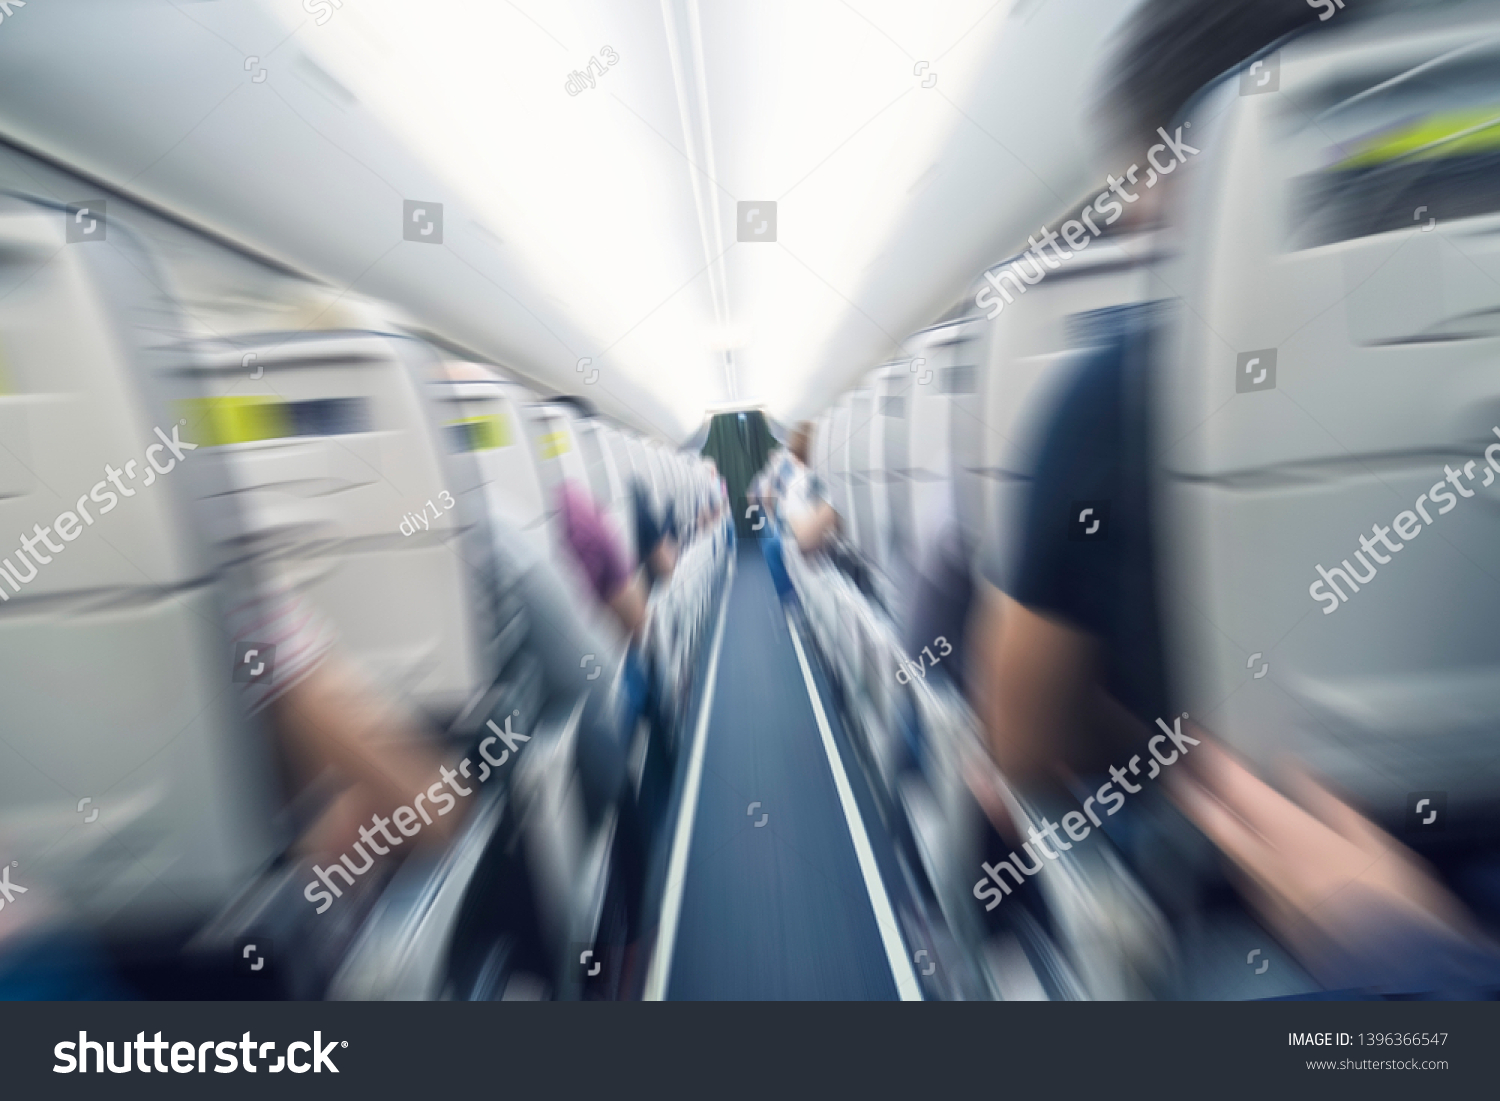 aerophobias concept. plane shakes during turbulence flying air hole. Blur image commercial plane moving fast downwards. Fear of flying. collapse slump, depression, downfall, debacle, subsidence. dive #1396366547